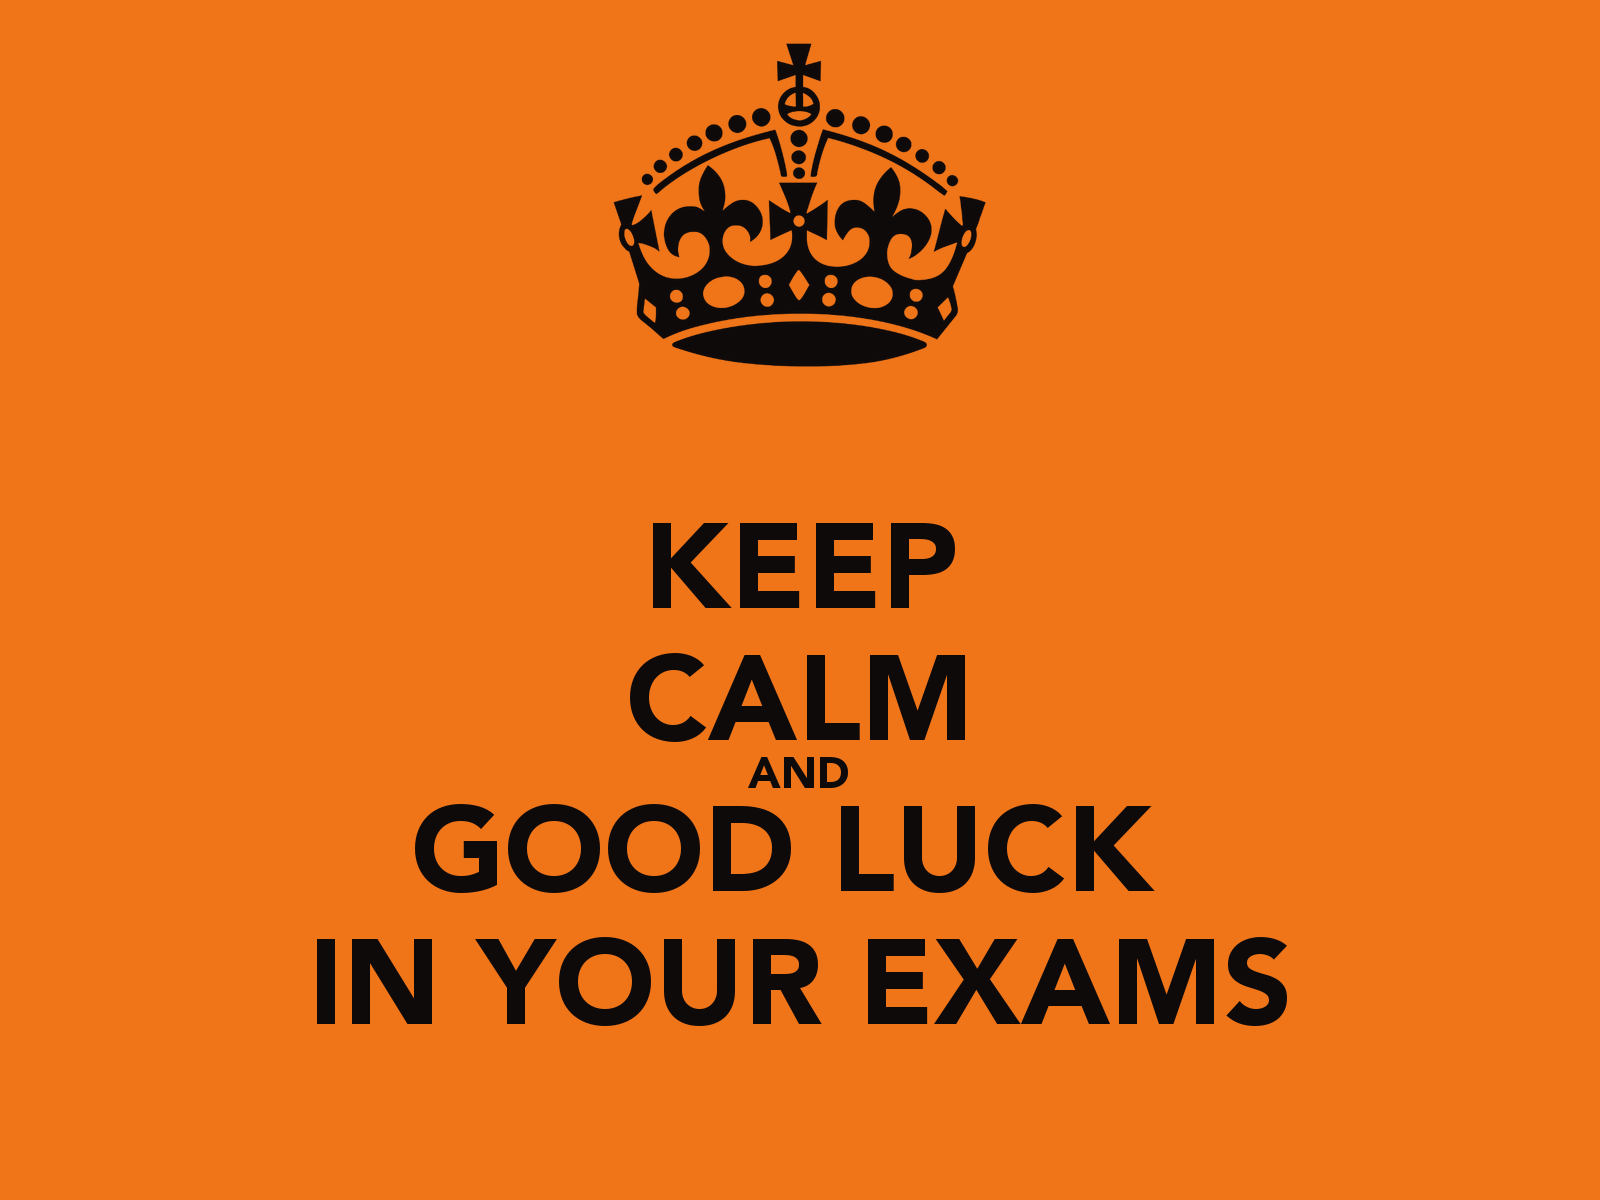 Good Luck Text Images - Free Download on Freepik